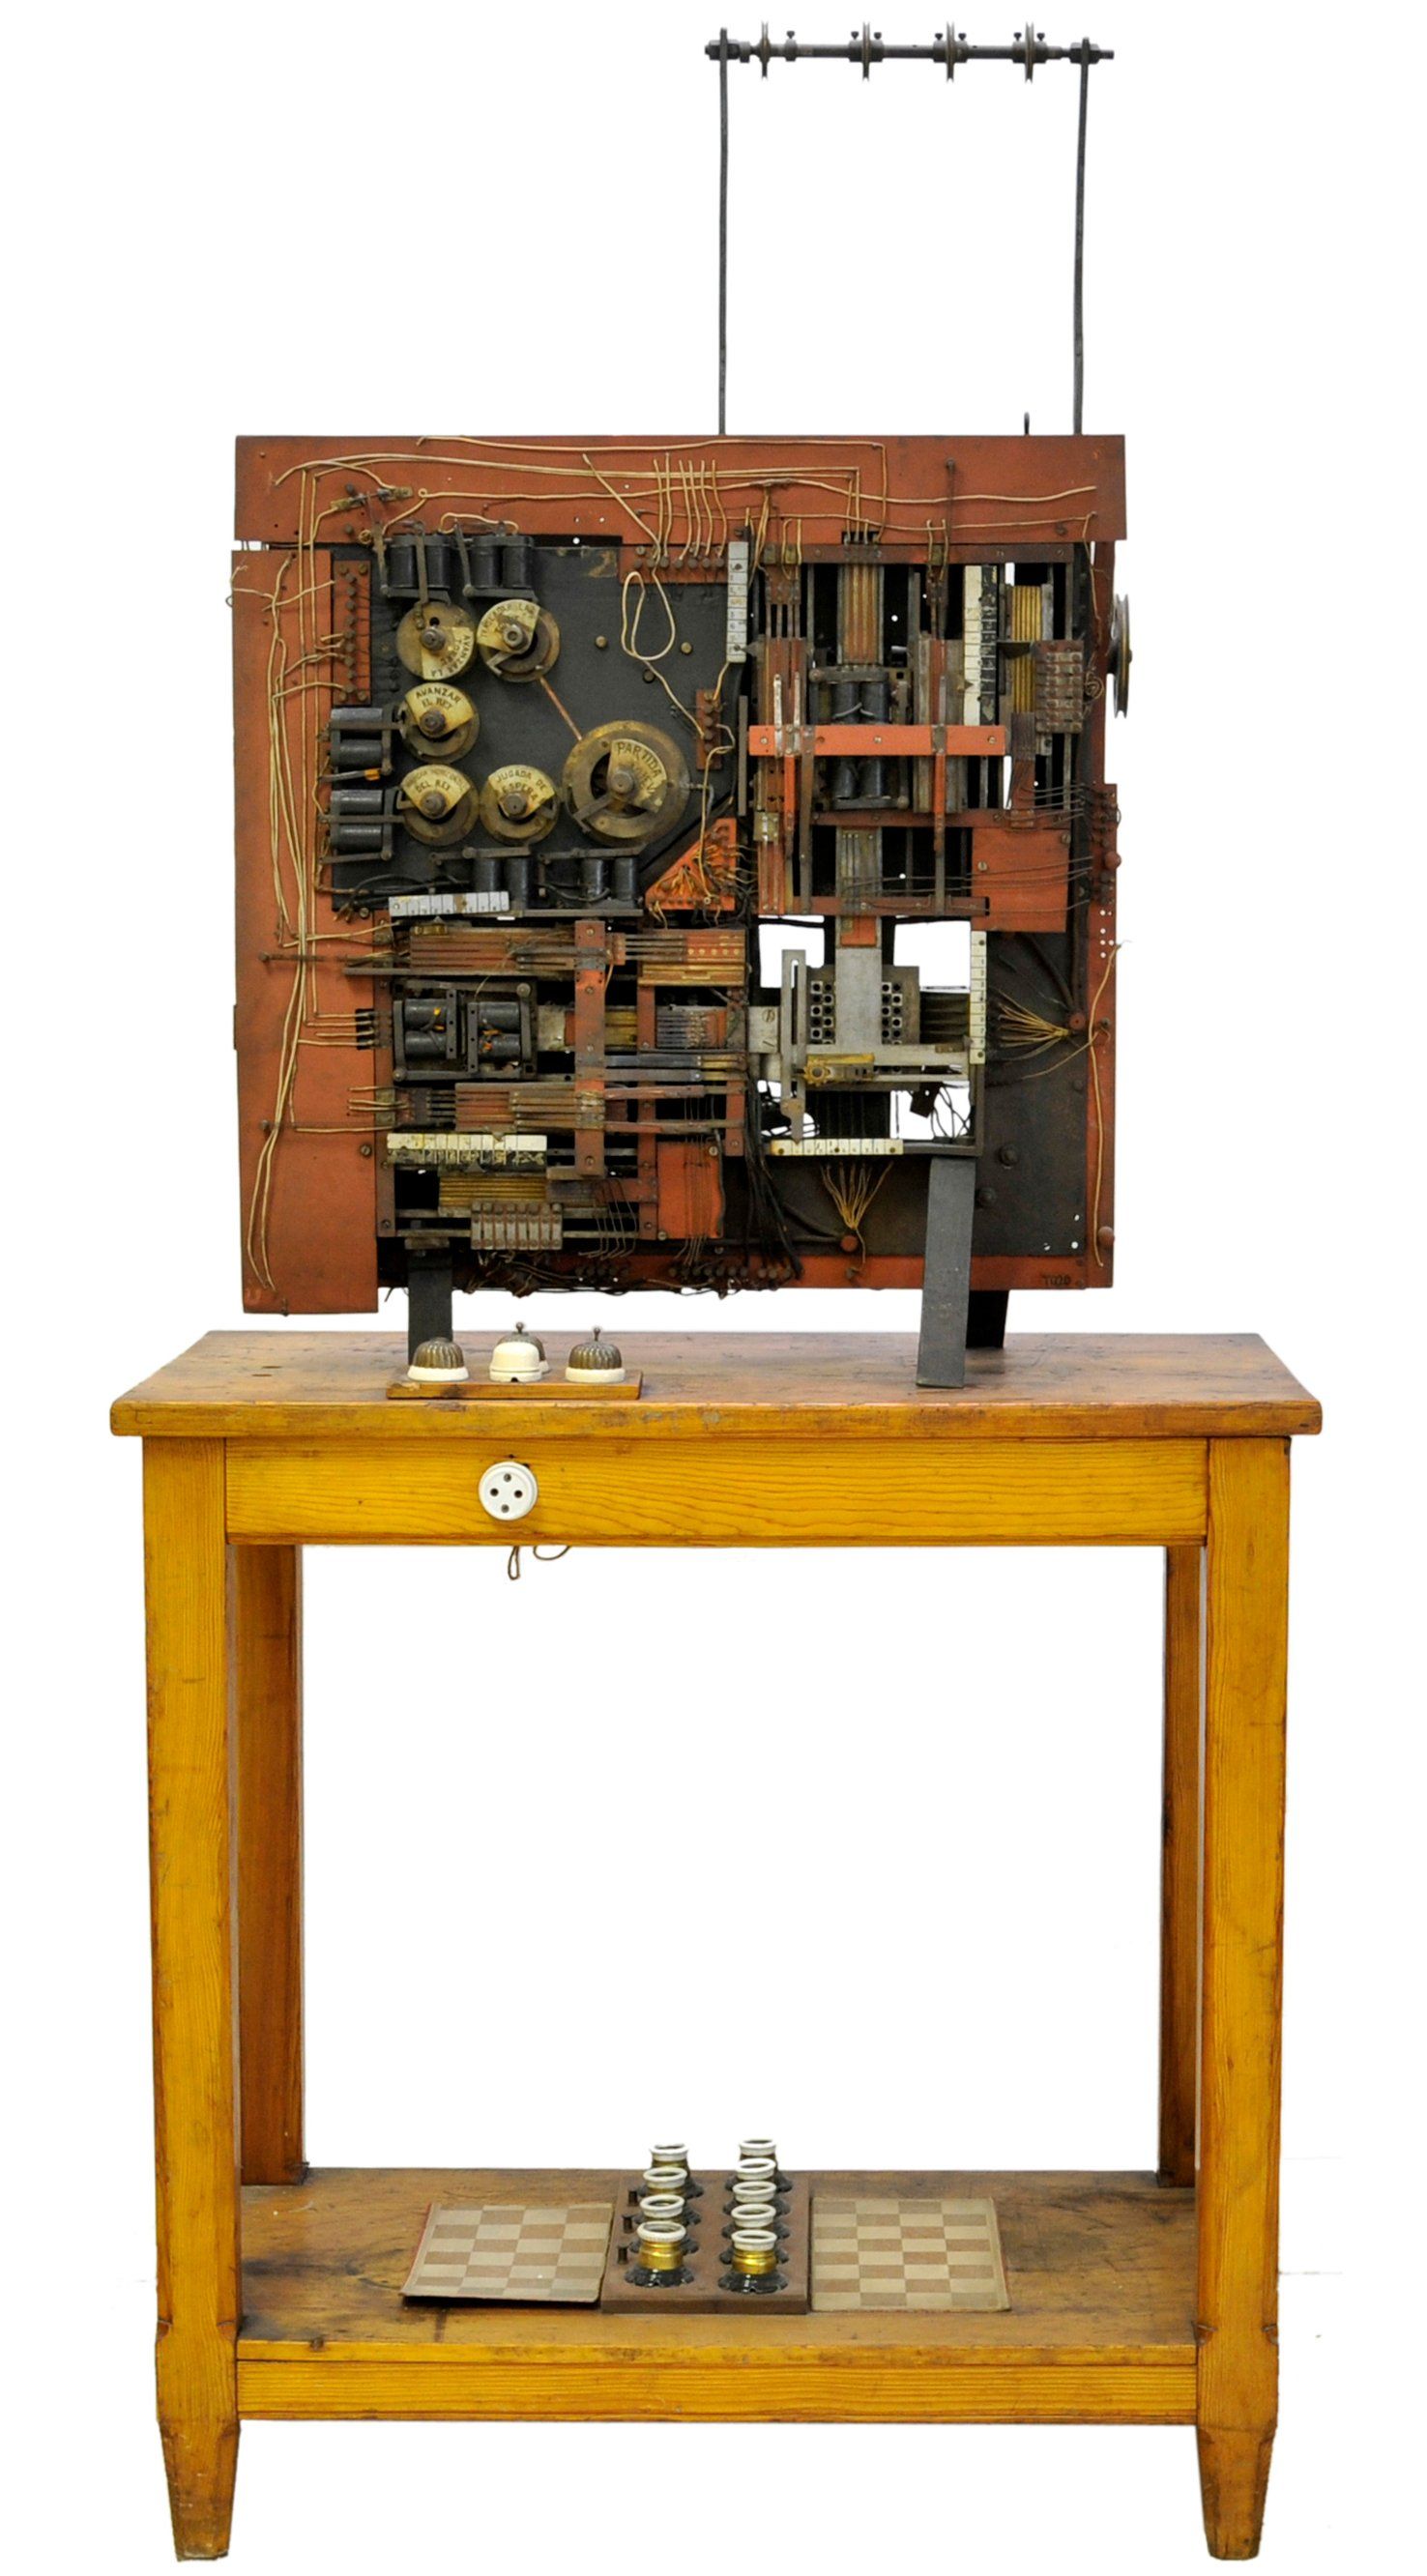 This 1920 Chess Automaton Was Wired to Win - IEEE Spectrum